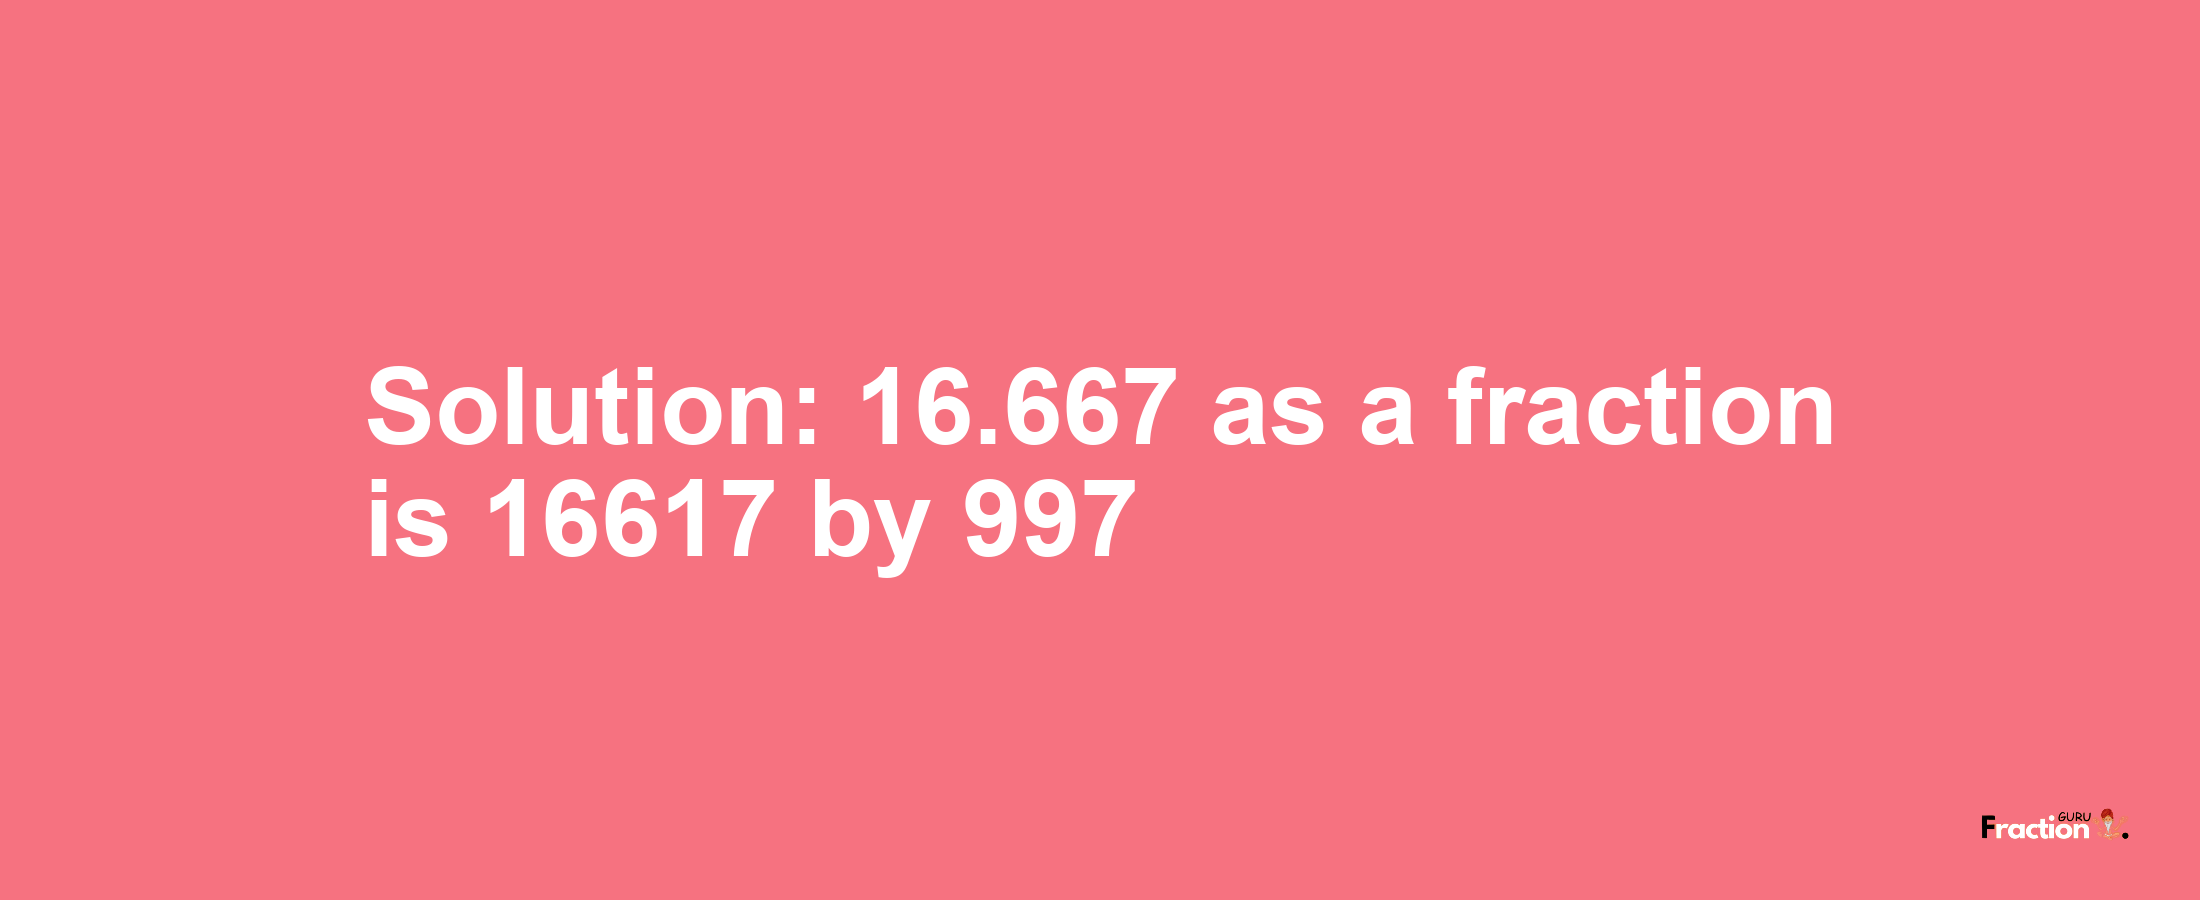 Solution:16.667 as a fraction is 16617/997